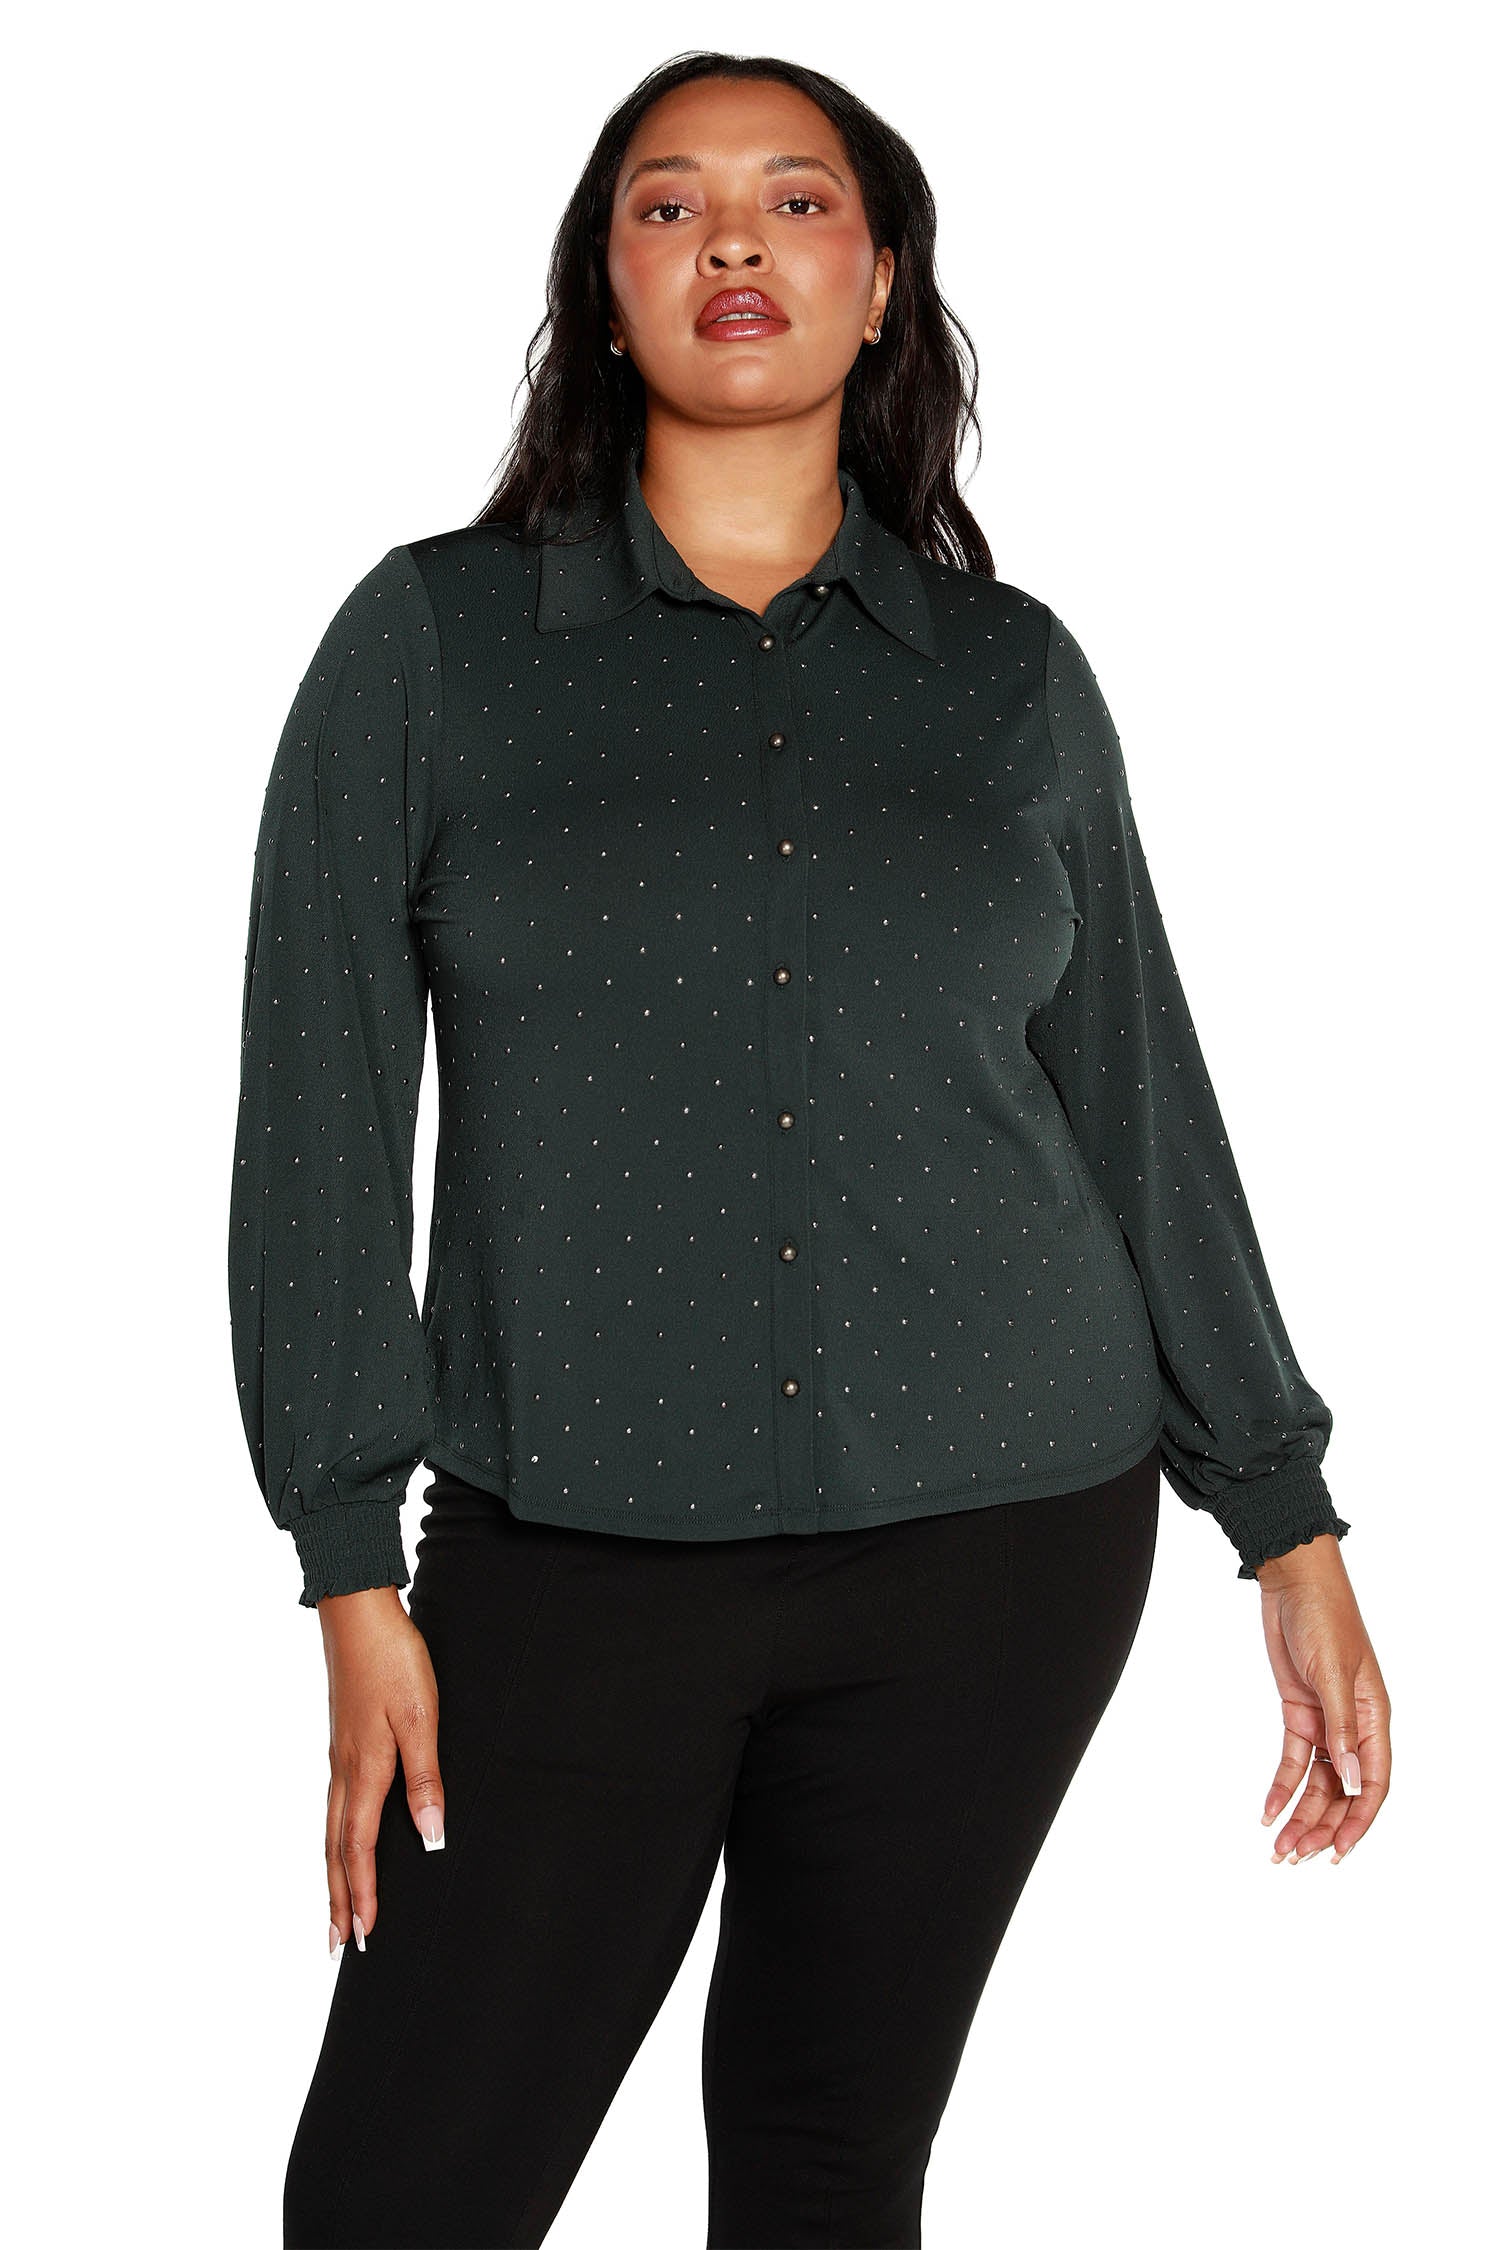 Women's Button Front Blouse with Long Blouson Sleeves with Metallic Studs | Curvy